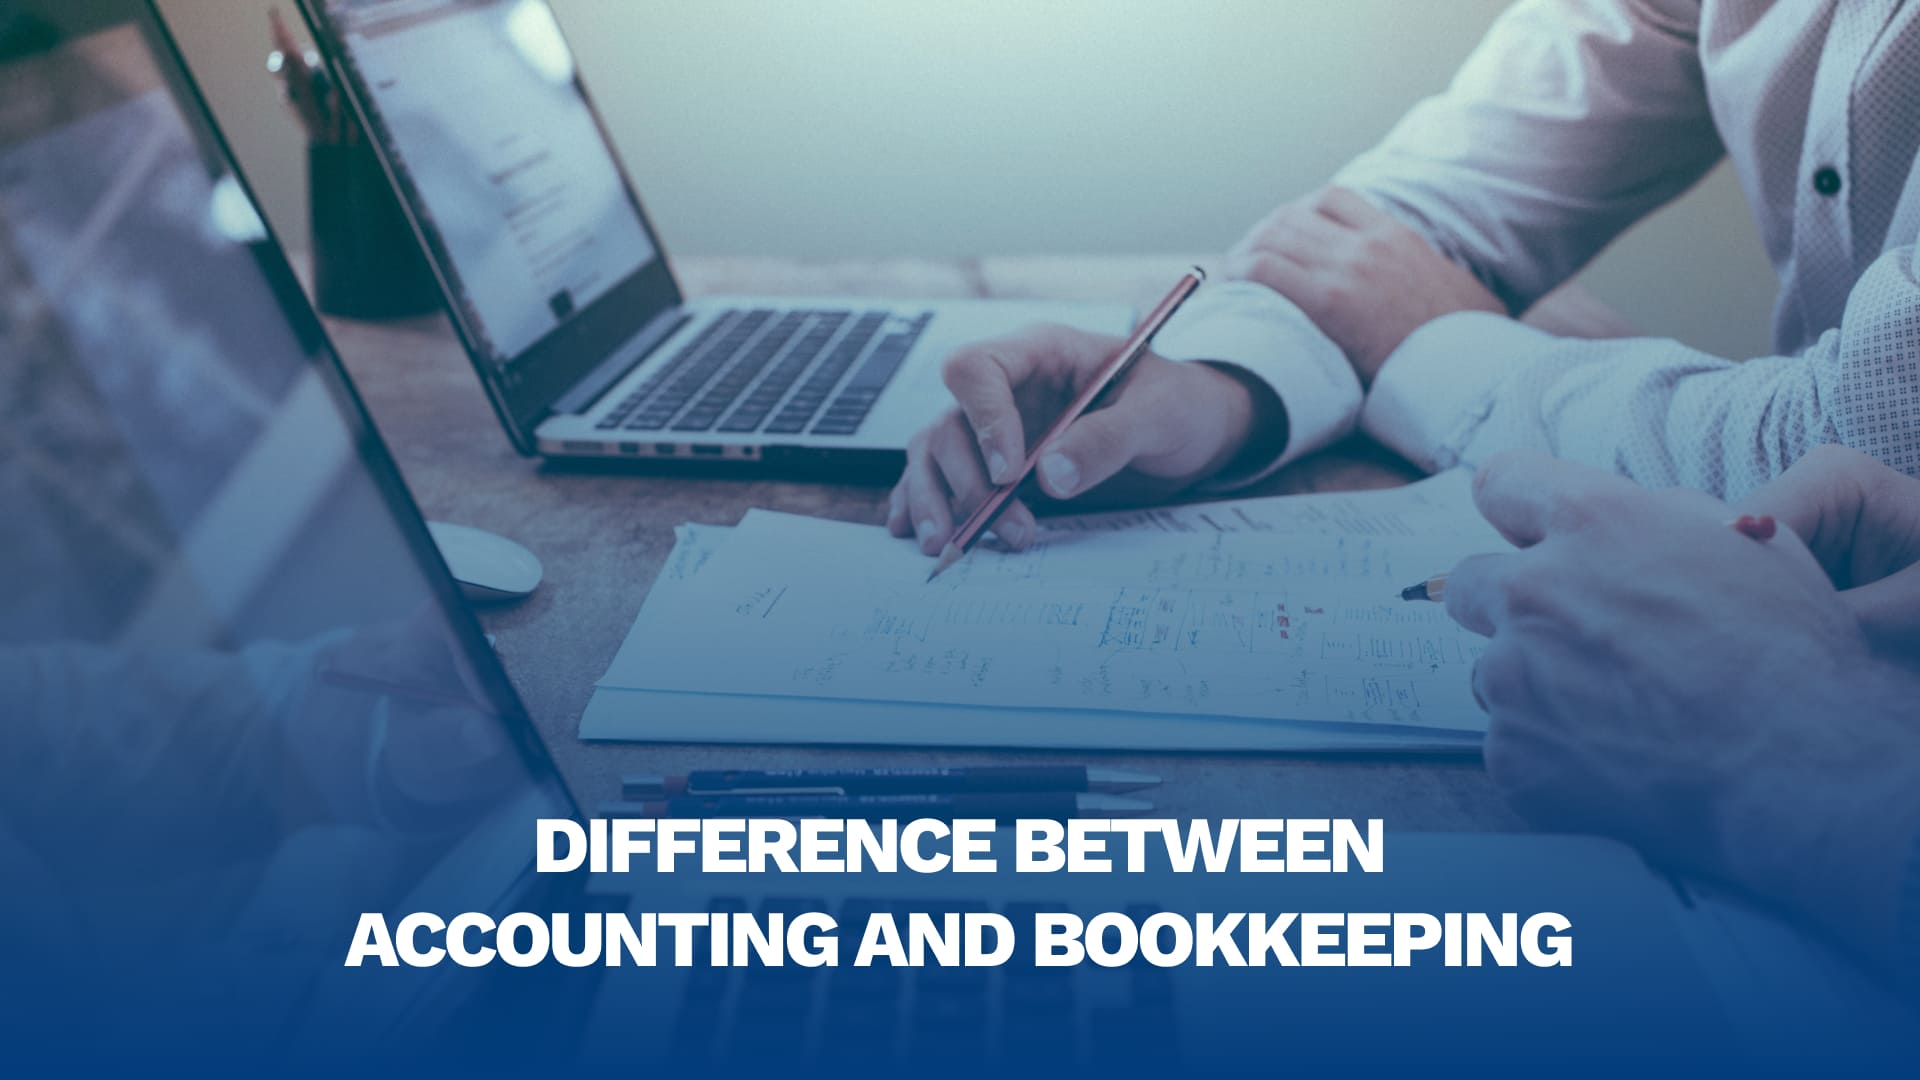 What’s the Difference Between Accounting and Bookkeeping?